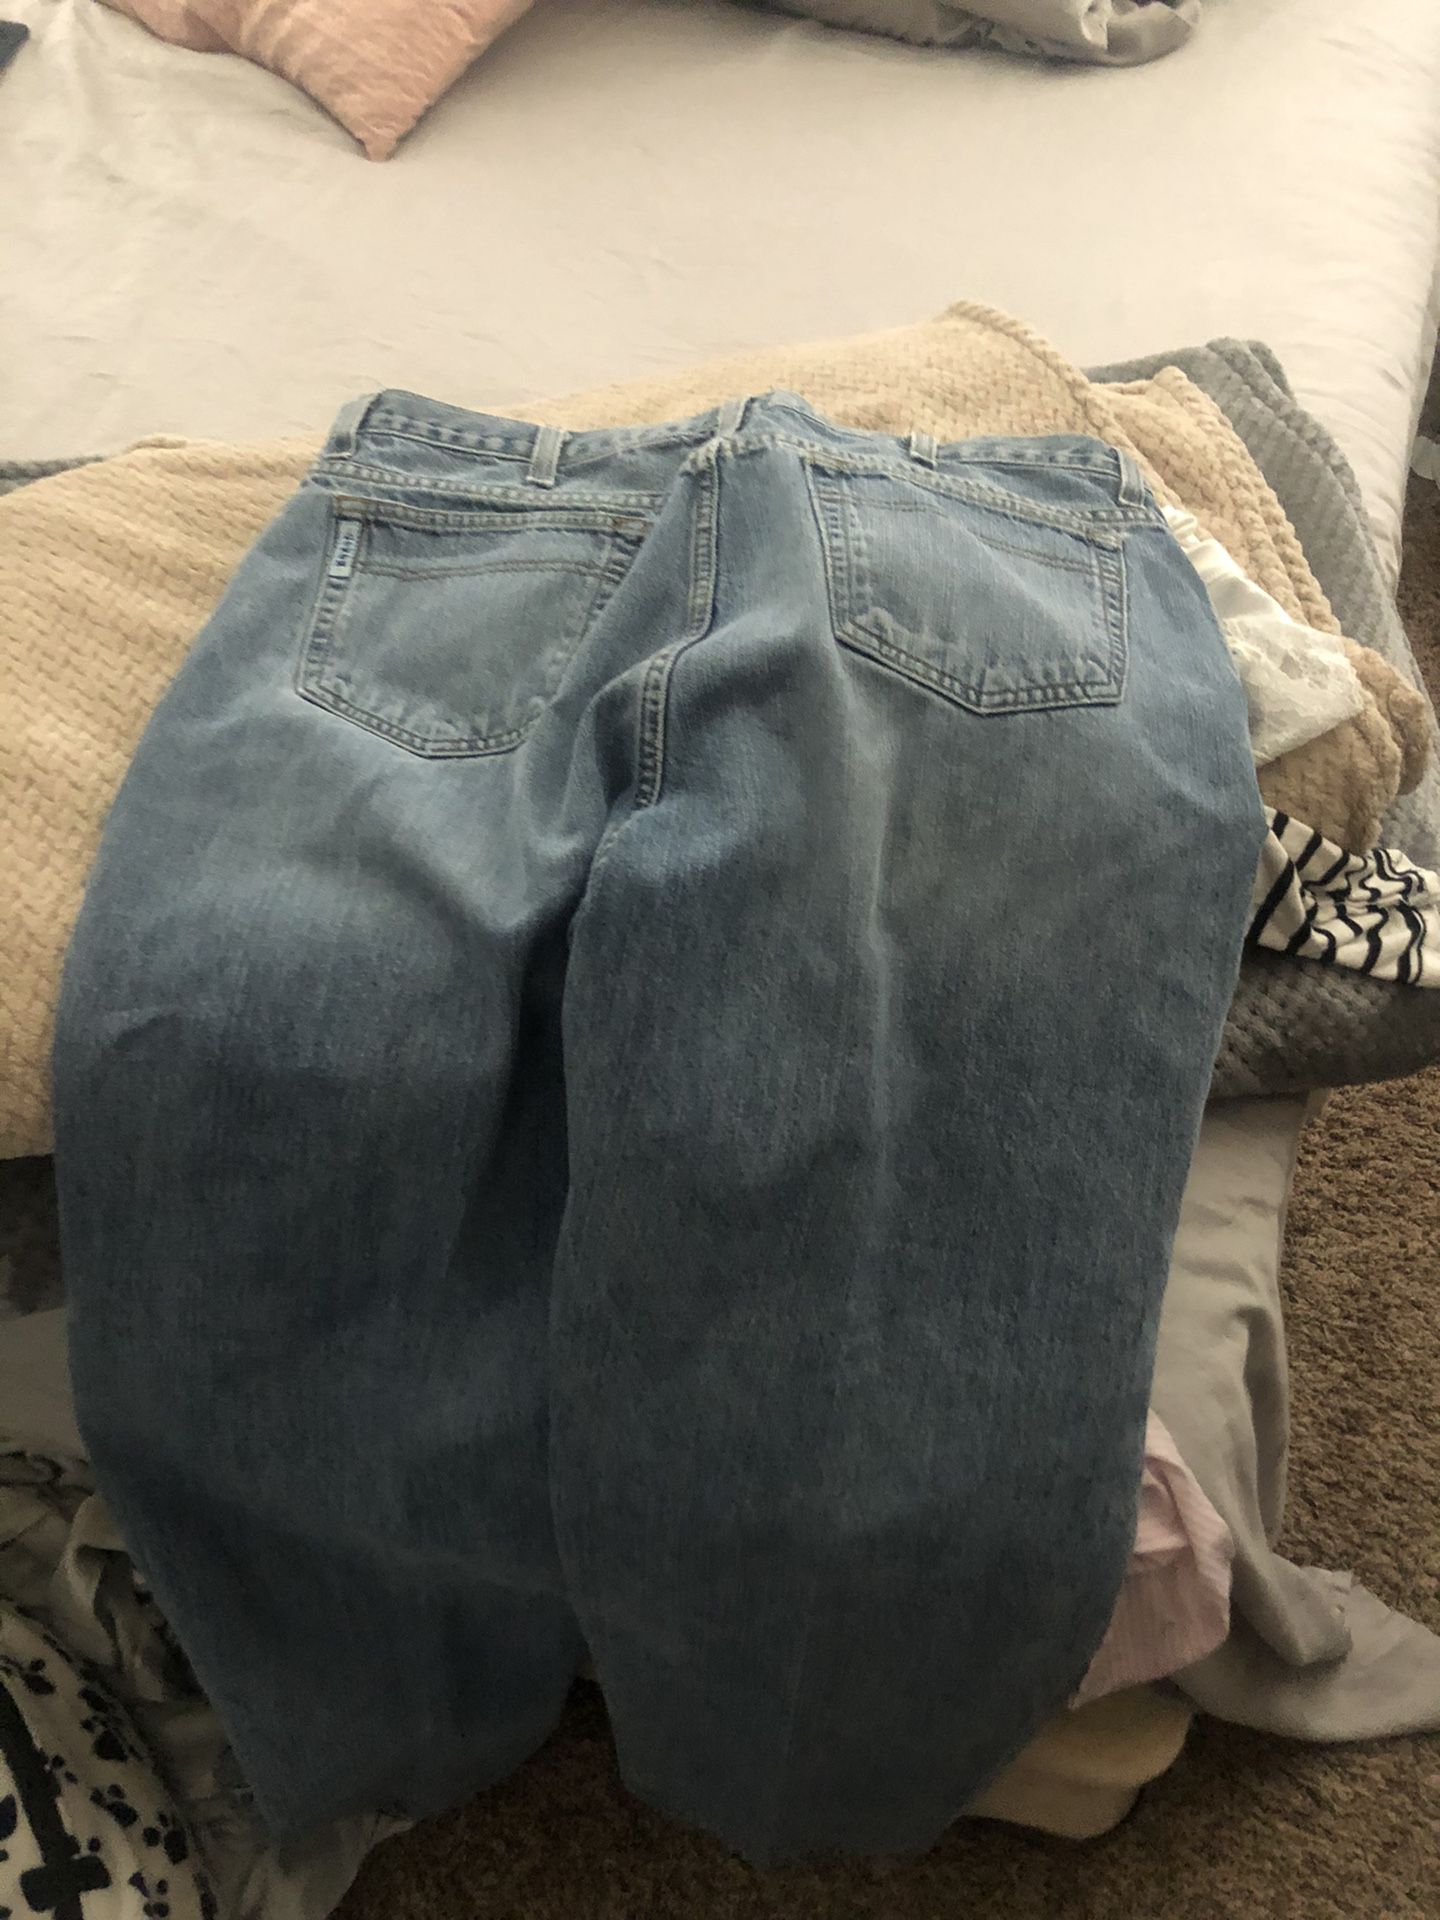 Men’s cinch jeans. The button hole is stretched as can be seen in one of the photos. Good condition otherwise.